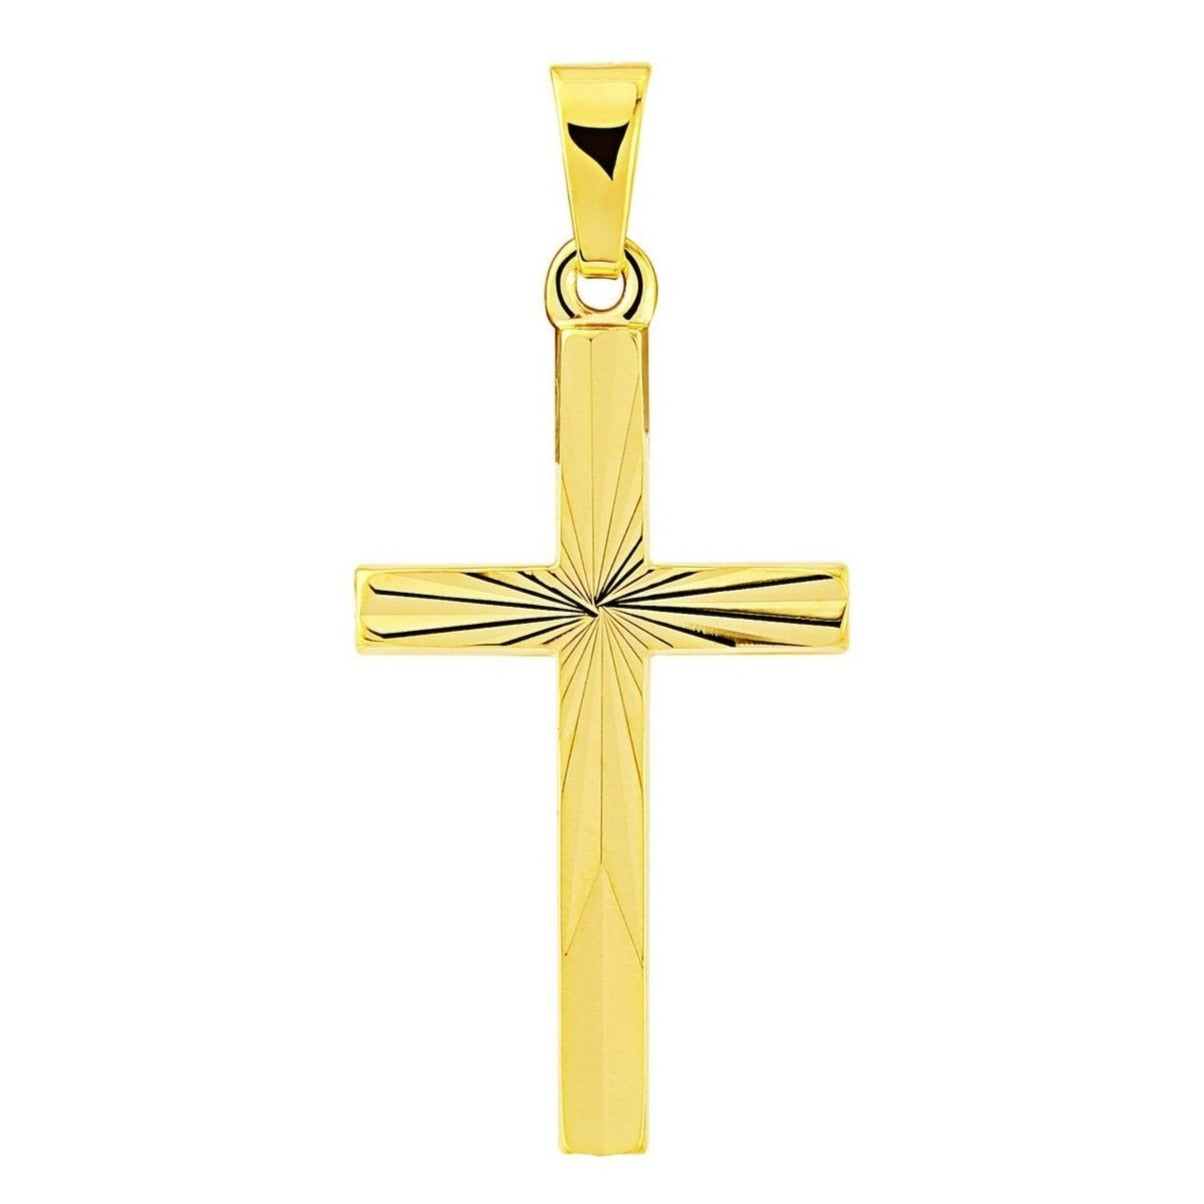 9ct gold 22mm x 14mm patterned cross